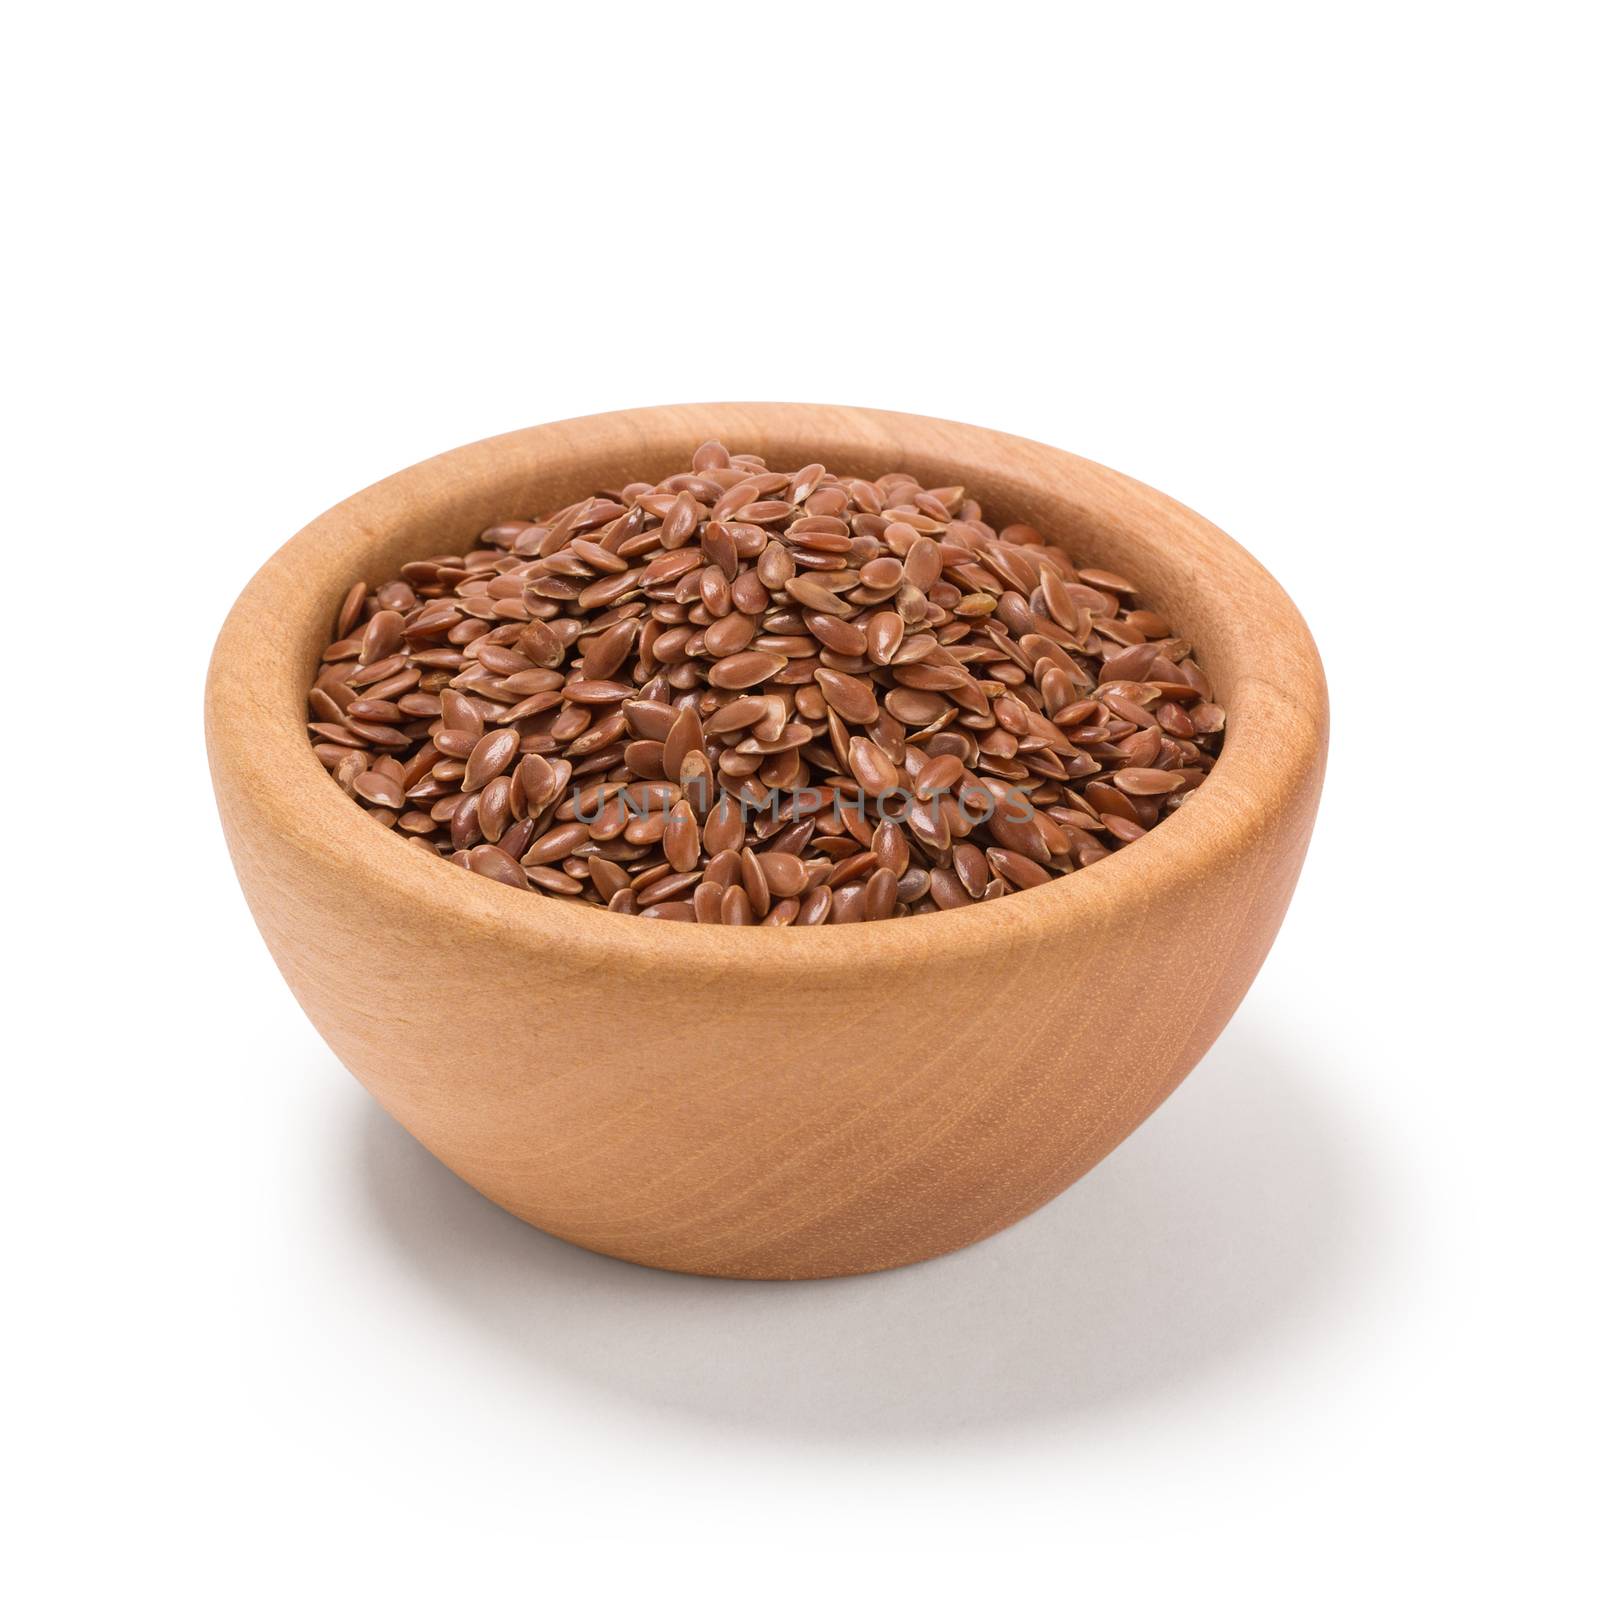 Flax seeds, Linseed, Lin seeds close-up brown flax seed or linseed in a wooden bowl, isolated on white. by ivo_13